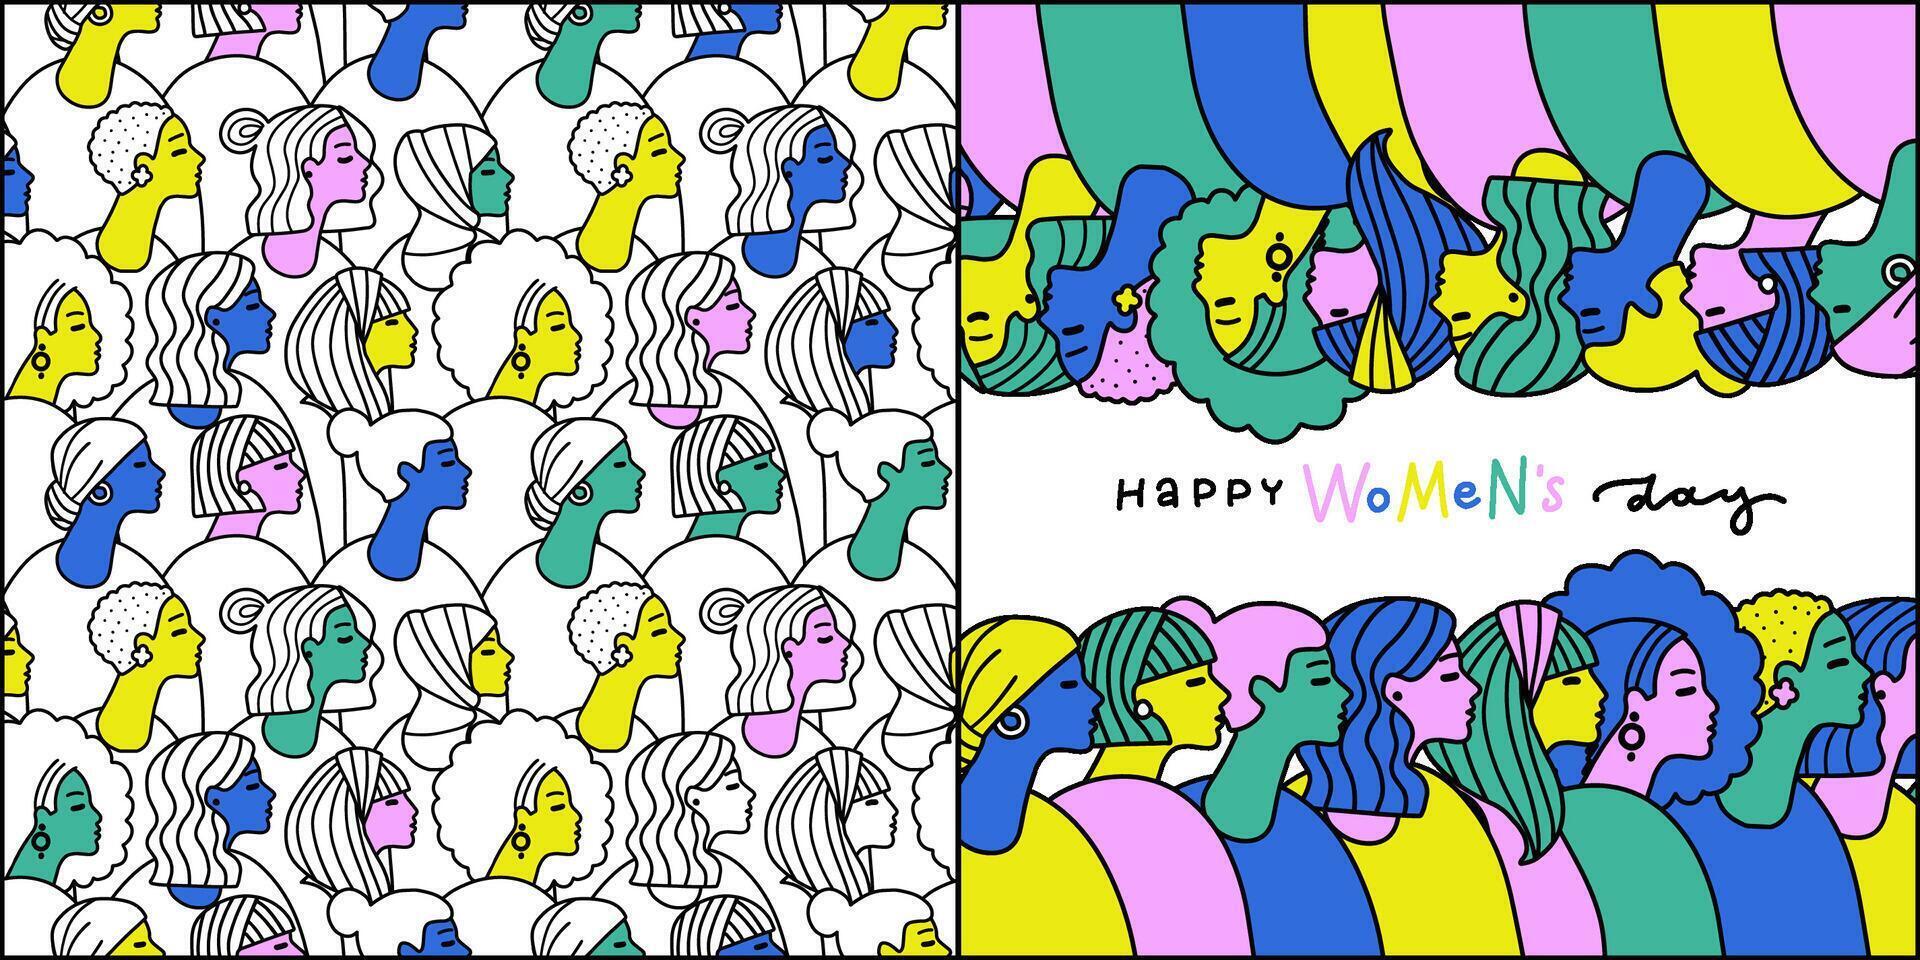 Line art of Women's day art - greeting card and pattern set. Isolated women head profiles doodles. Empowerment And women solidarity concept. vector